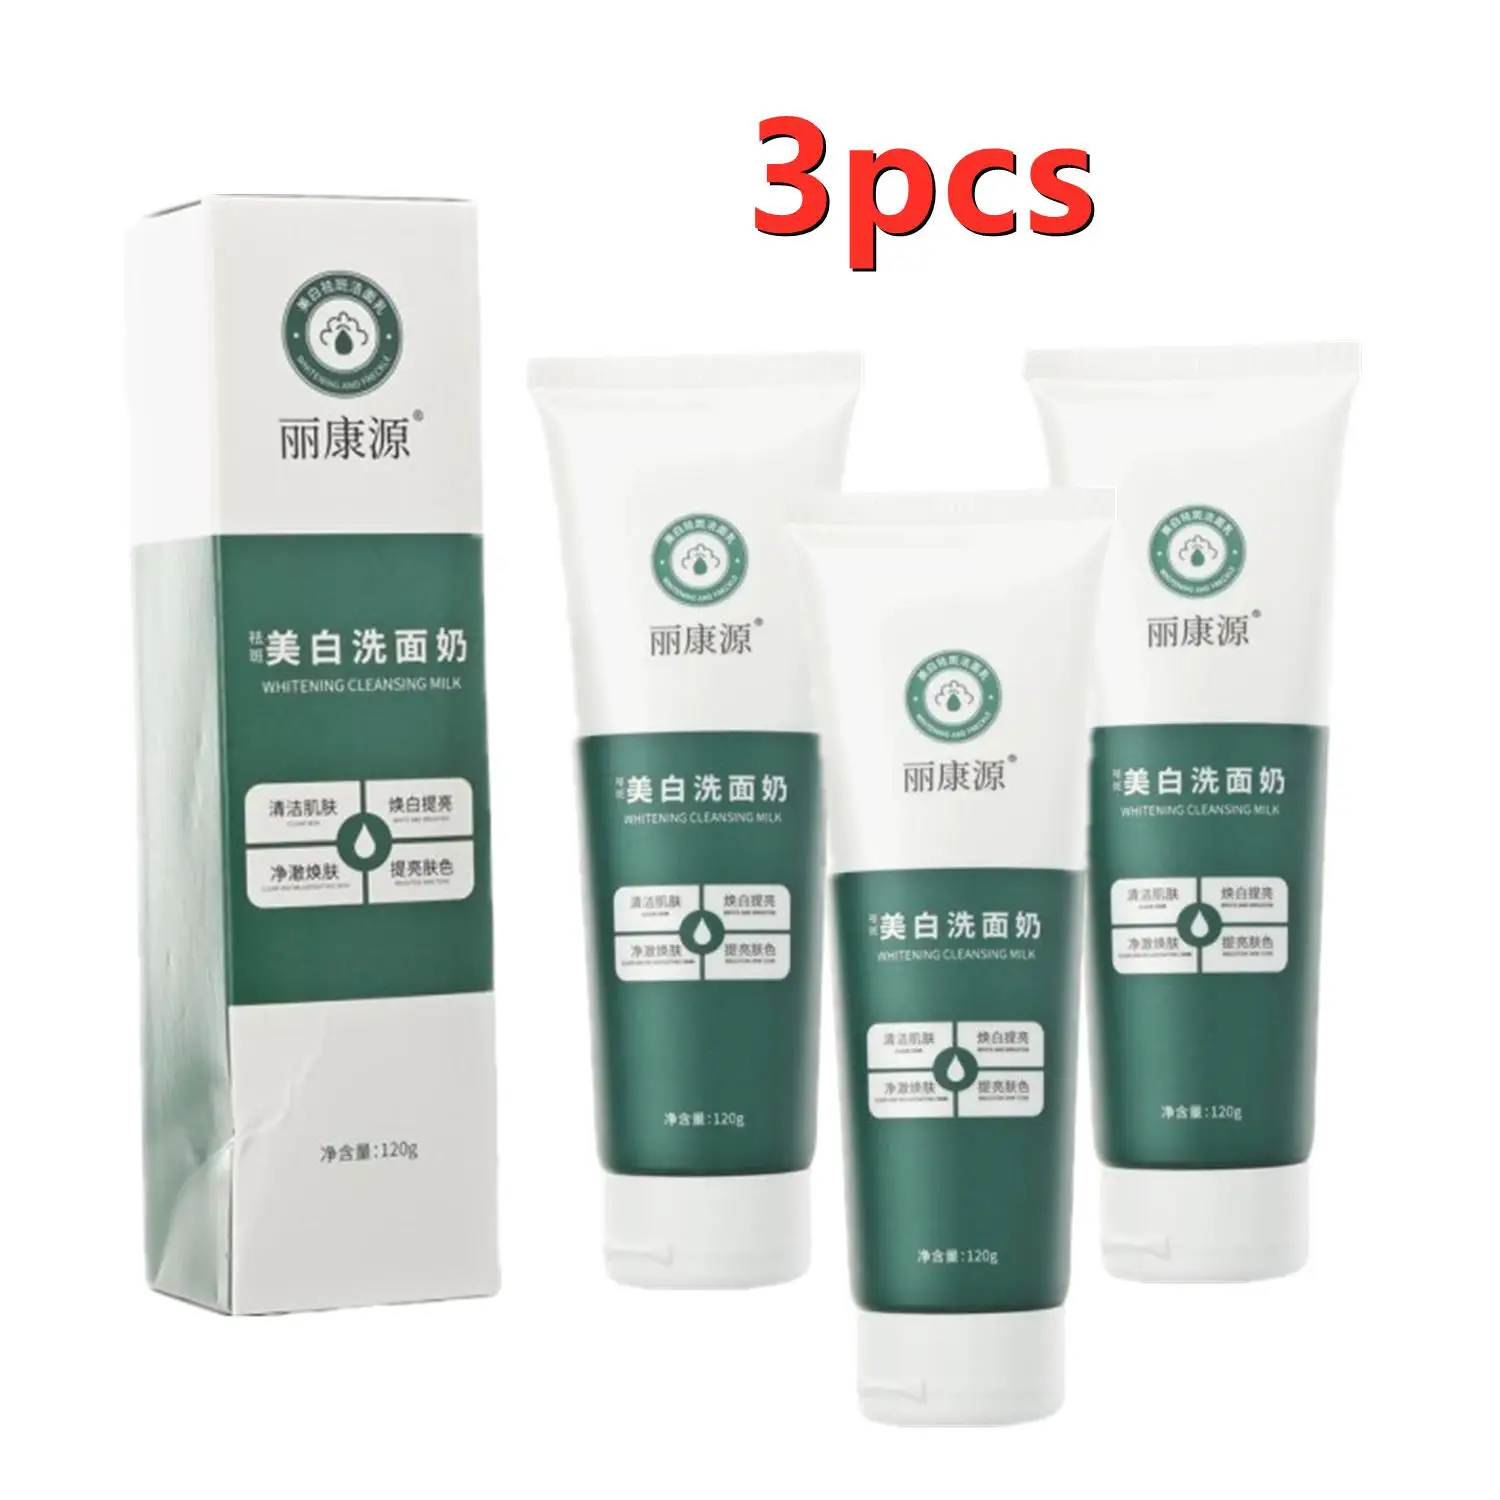 

3X Skin Hydrates Amino Acids Deep Cleansing Pore Refining Face 120g Facial Whitening Moisturizes Foaming Cleanser Wash